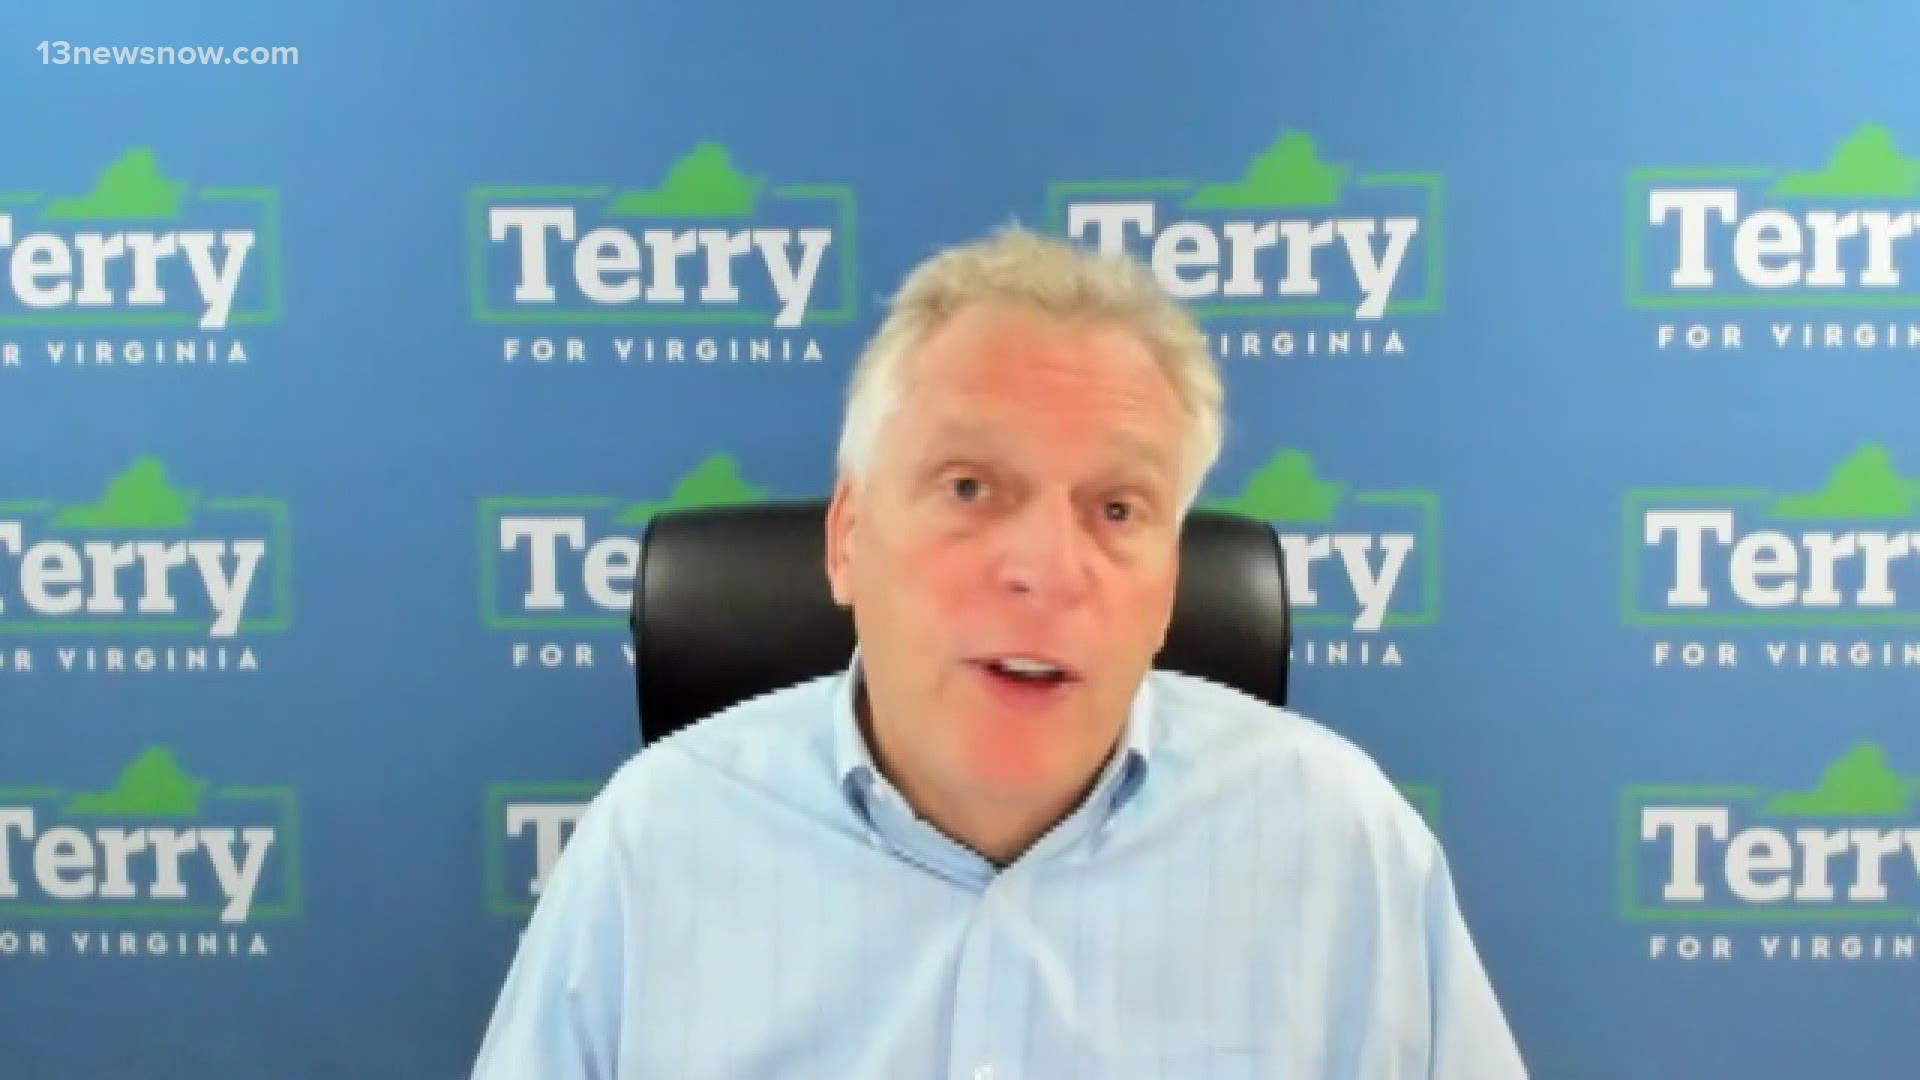 Democratic gubernatorial candidate Terry McAuliffe says he's the man that will move Virginia forward. He spoke on his efforts to increase inclusion across the state.